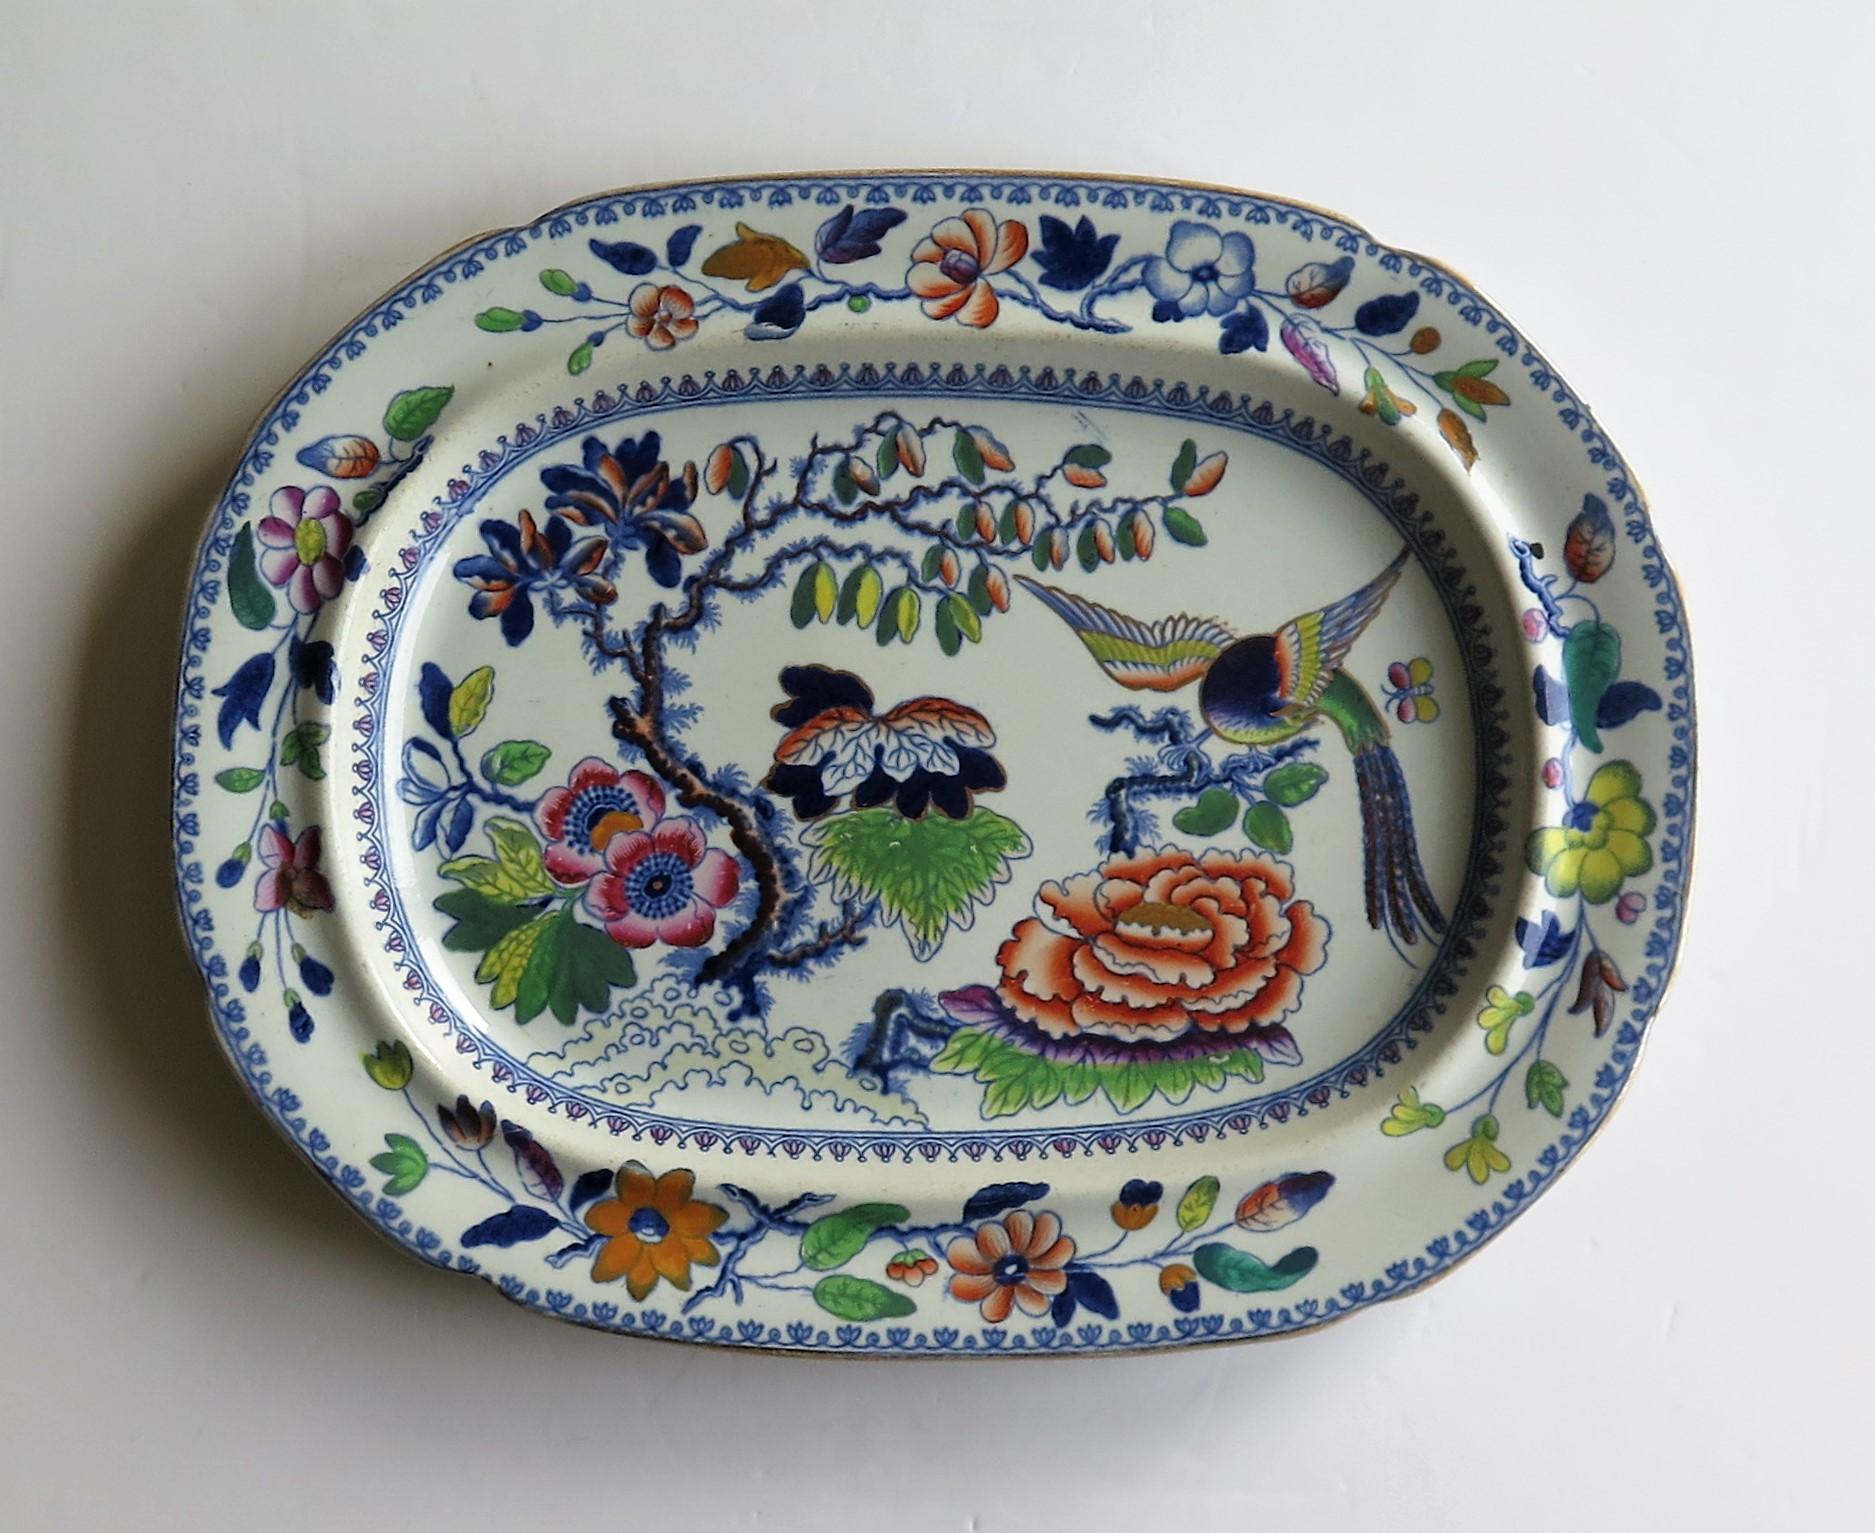 This is a good rounded rectangular Ironstone (stone china) serving platter or plate, in the flying bird pattern, circa 1825, which we attribute to the factory of Hicks, Meigh and Johnson of Shelton, Staffordshire Potteries, England, who made good